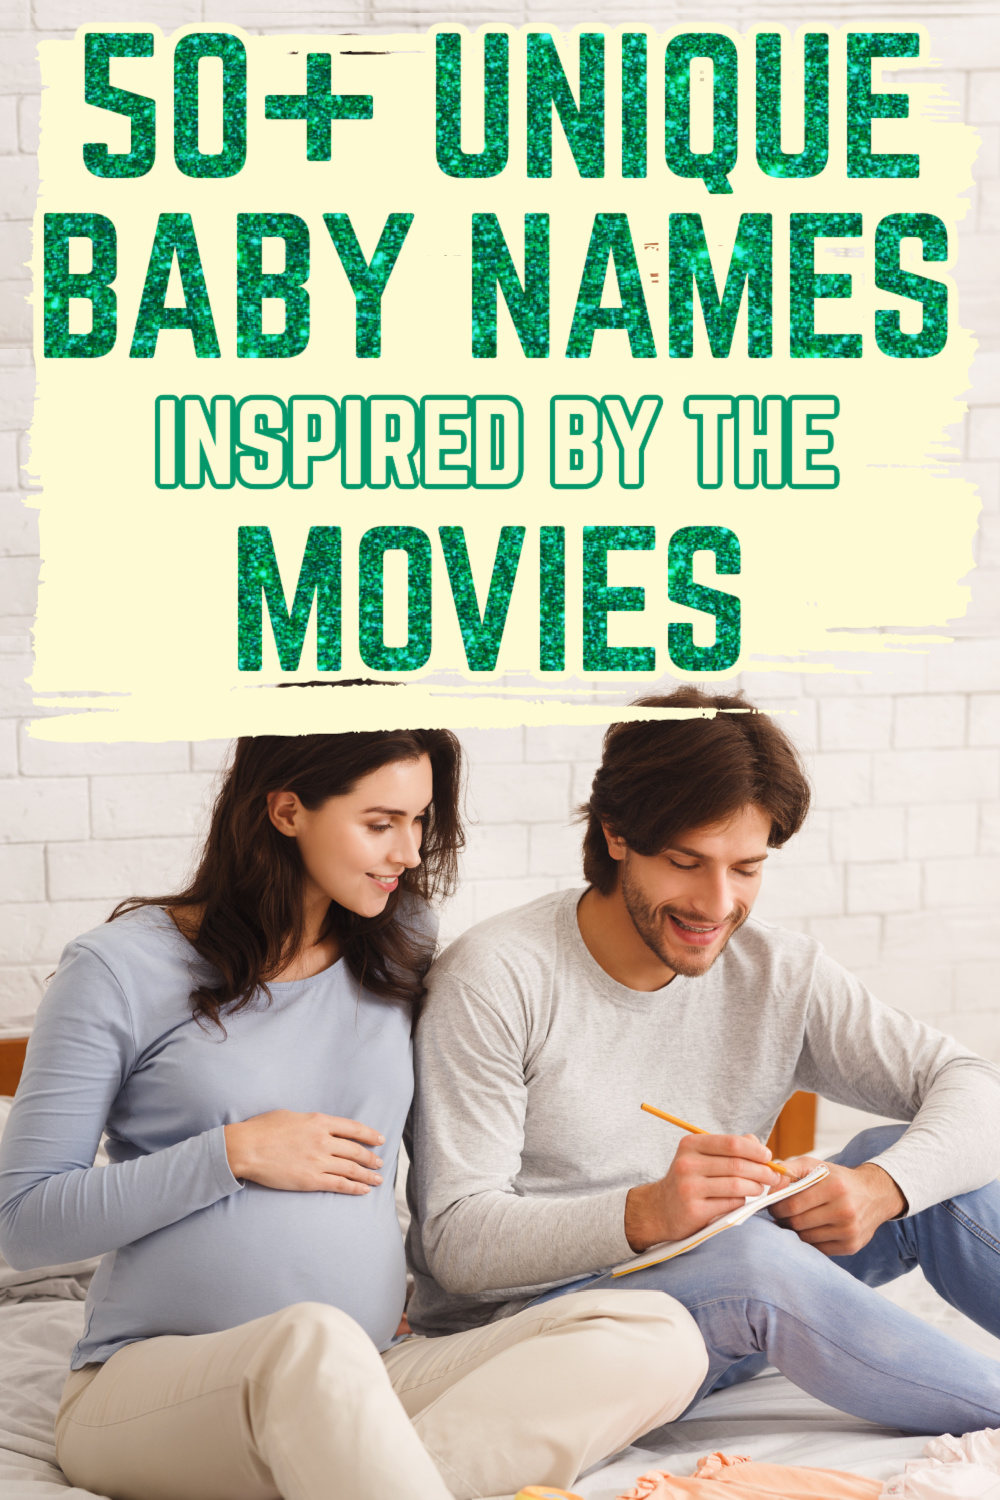 130 Baby Names Inspired by Fictional Characters